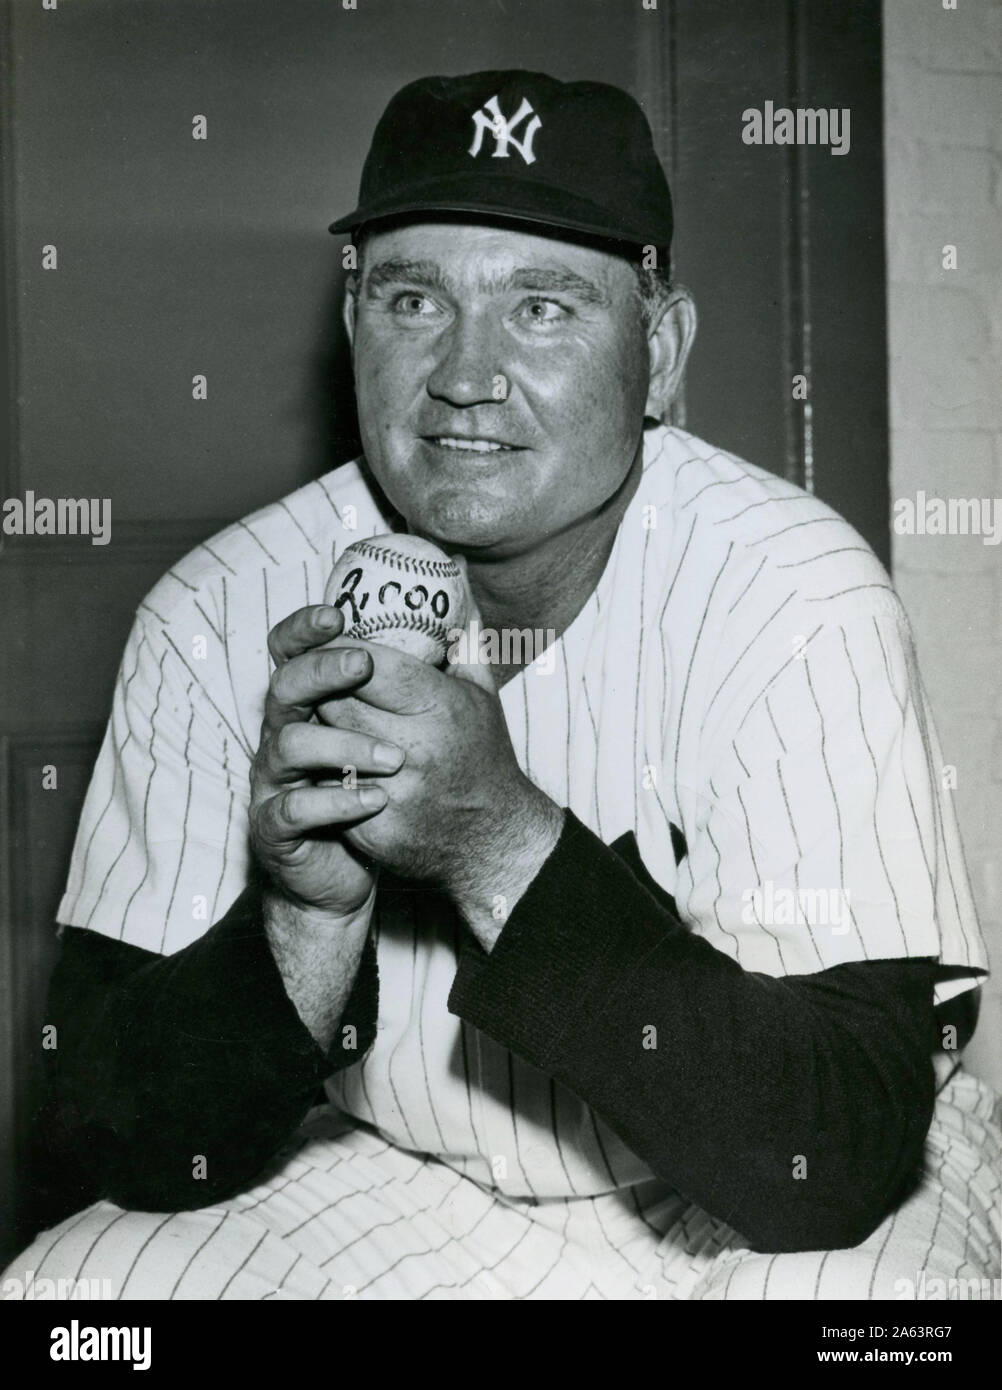 Vintage black and white photo of New York Yankees player Johnny Mize holding a ball commemorating his 2,000th hit in the major leagues circa 1950s. Stock Photo